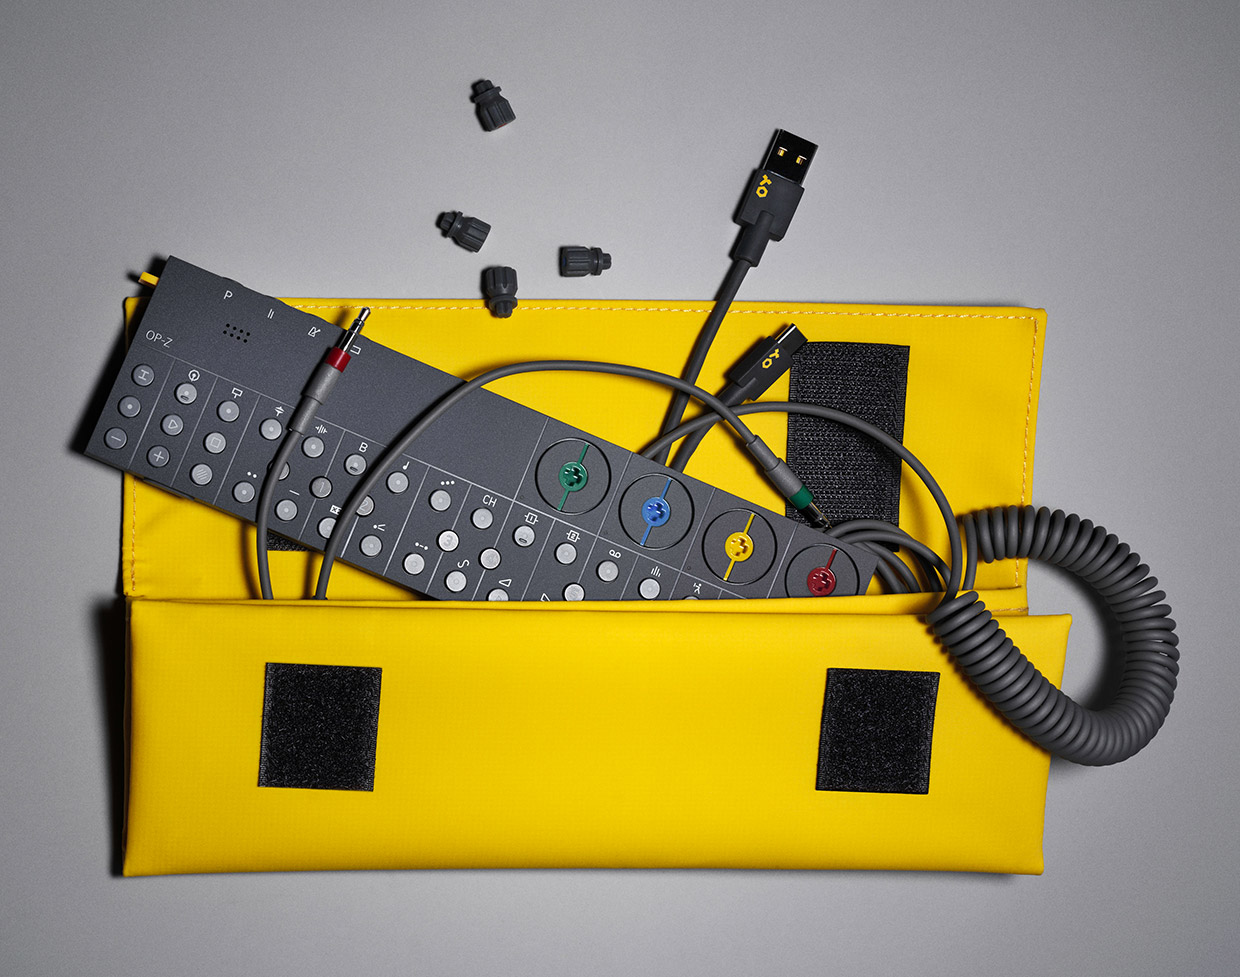 OP-Z Portable Synthesizer